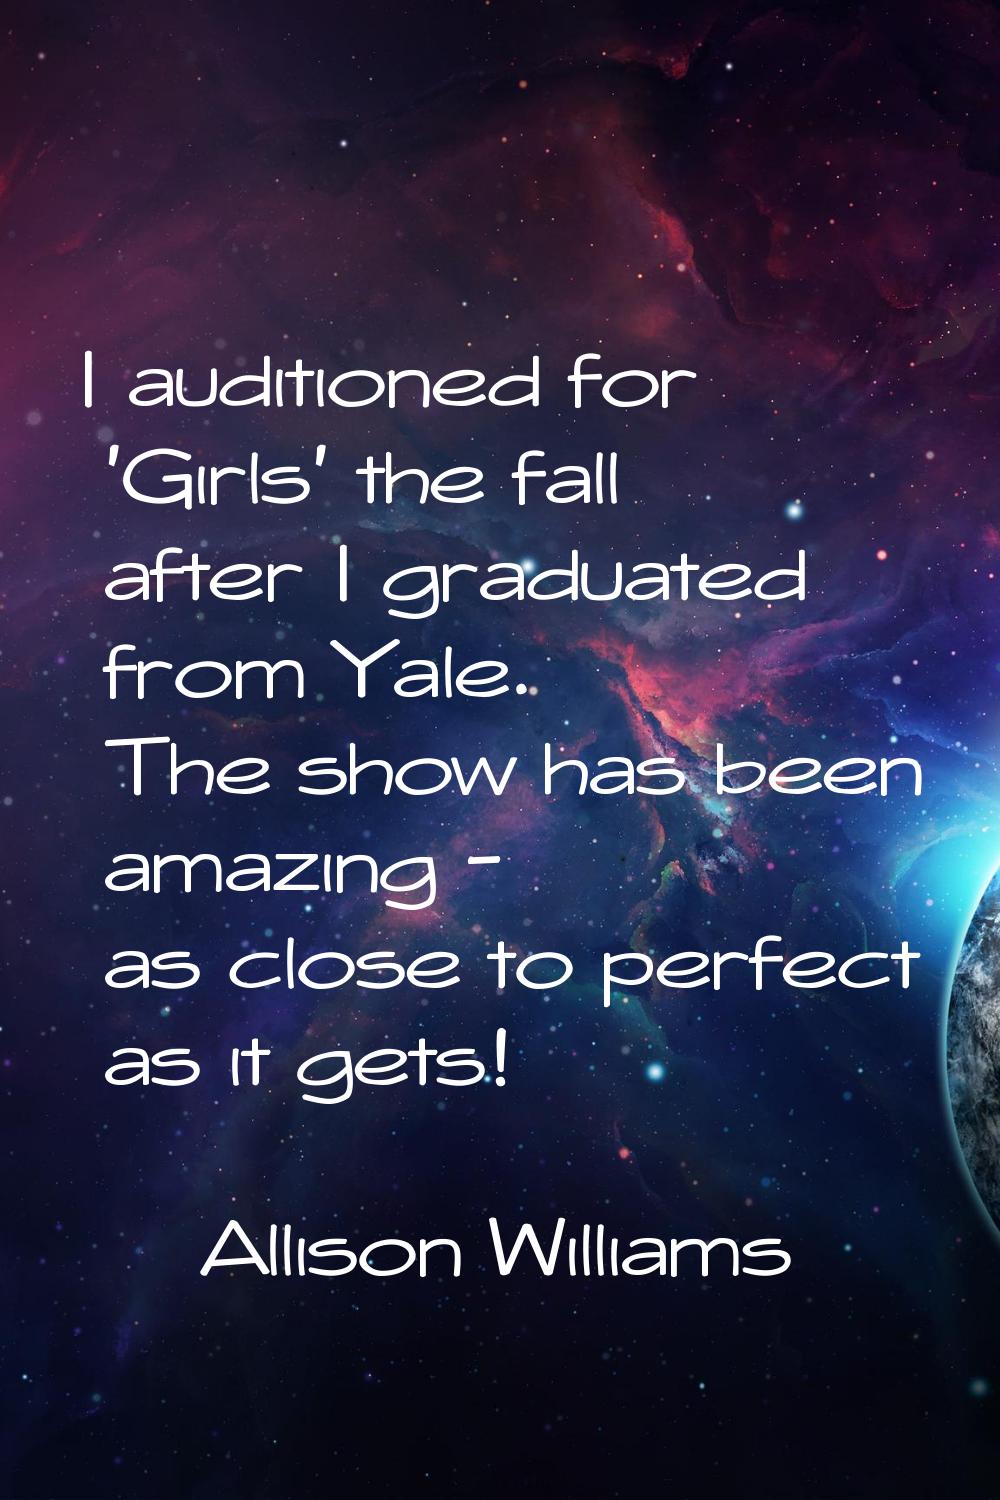 I auditioned for 'Girls' the fall after I graduated from Yale. The show has been amazing - as close